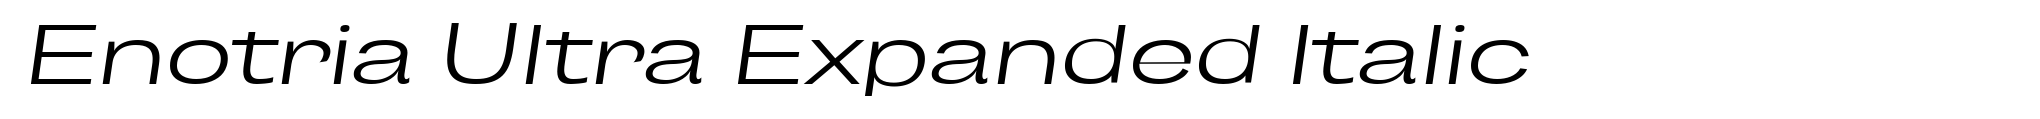 Enotria Ultra Expanded Italic image